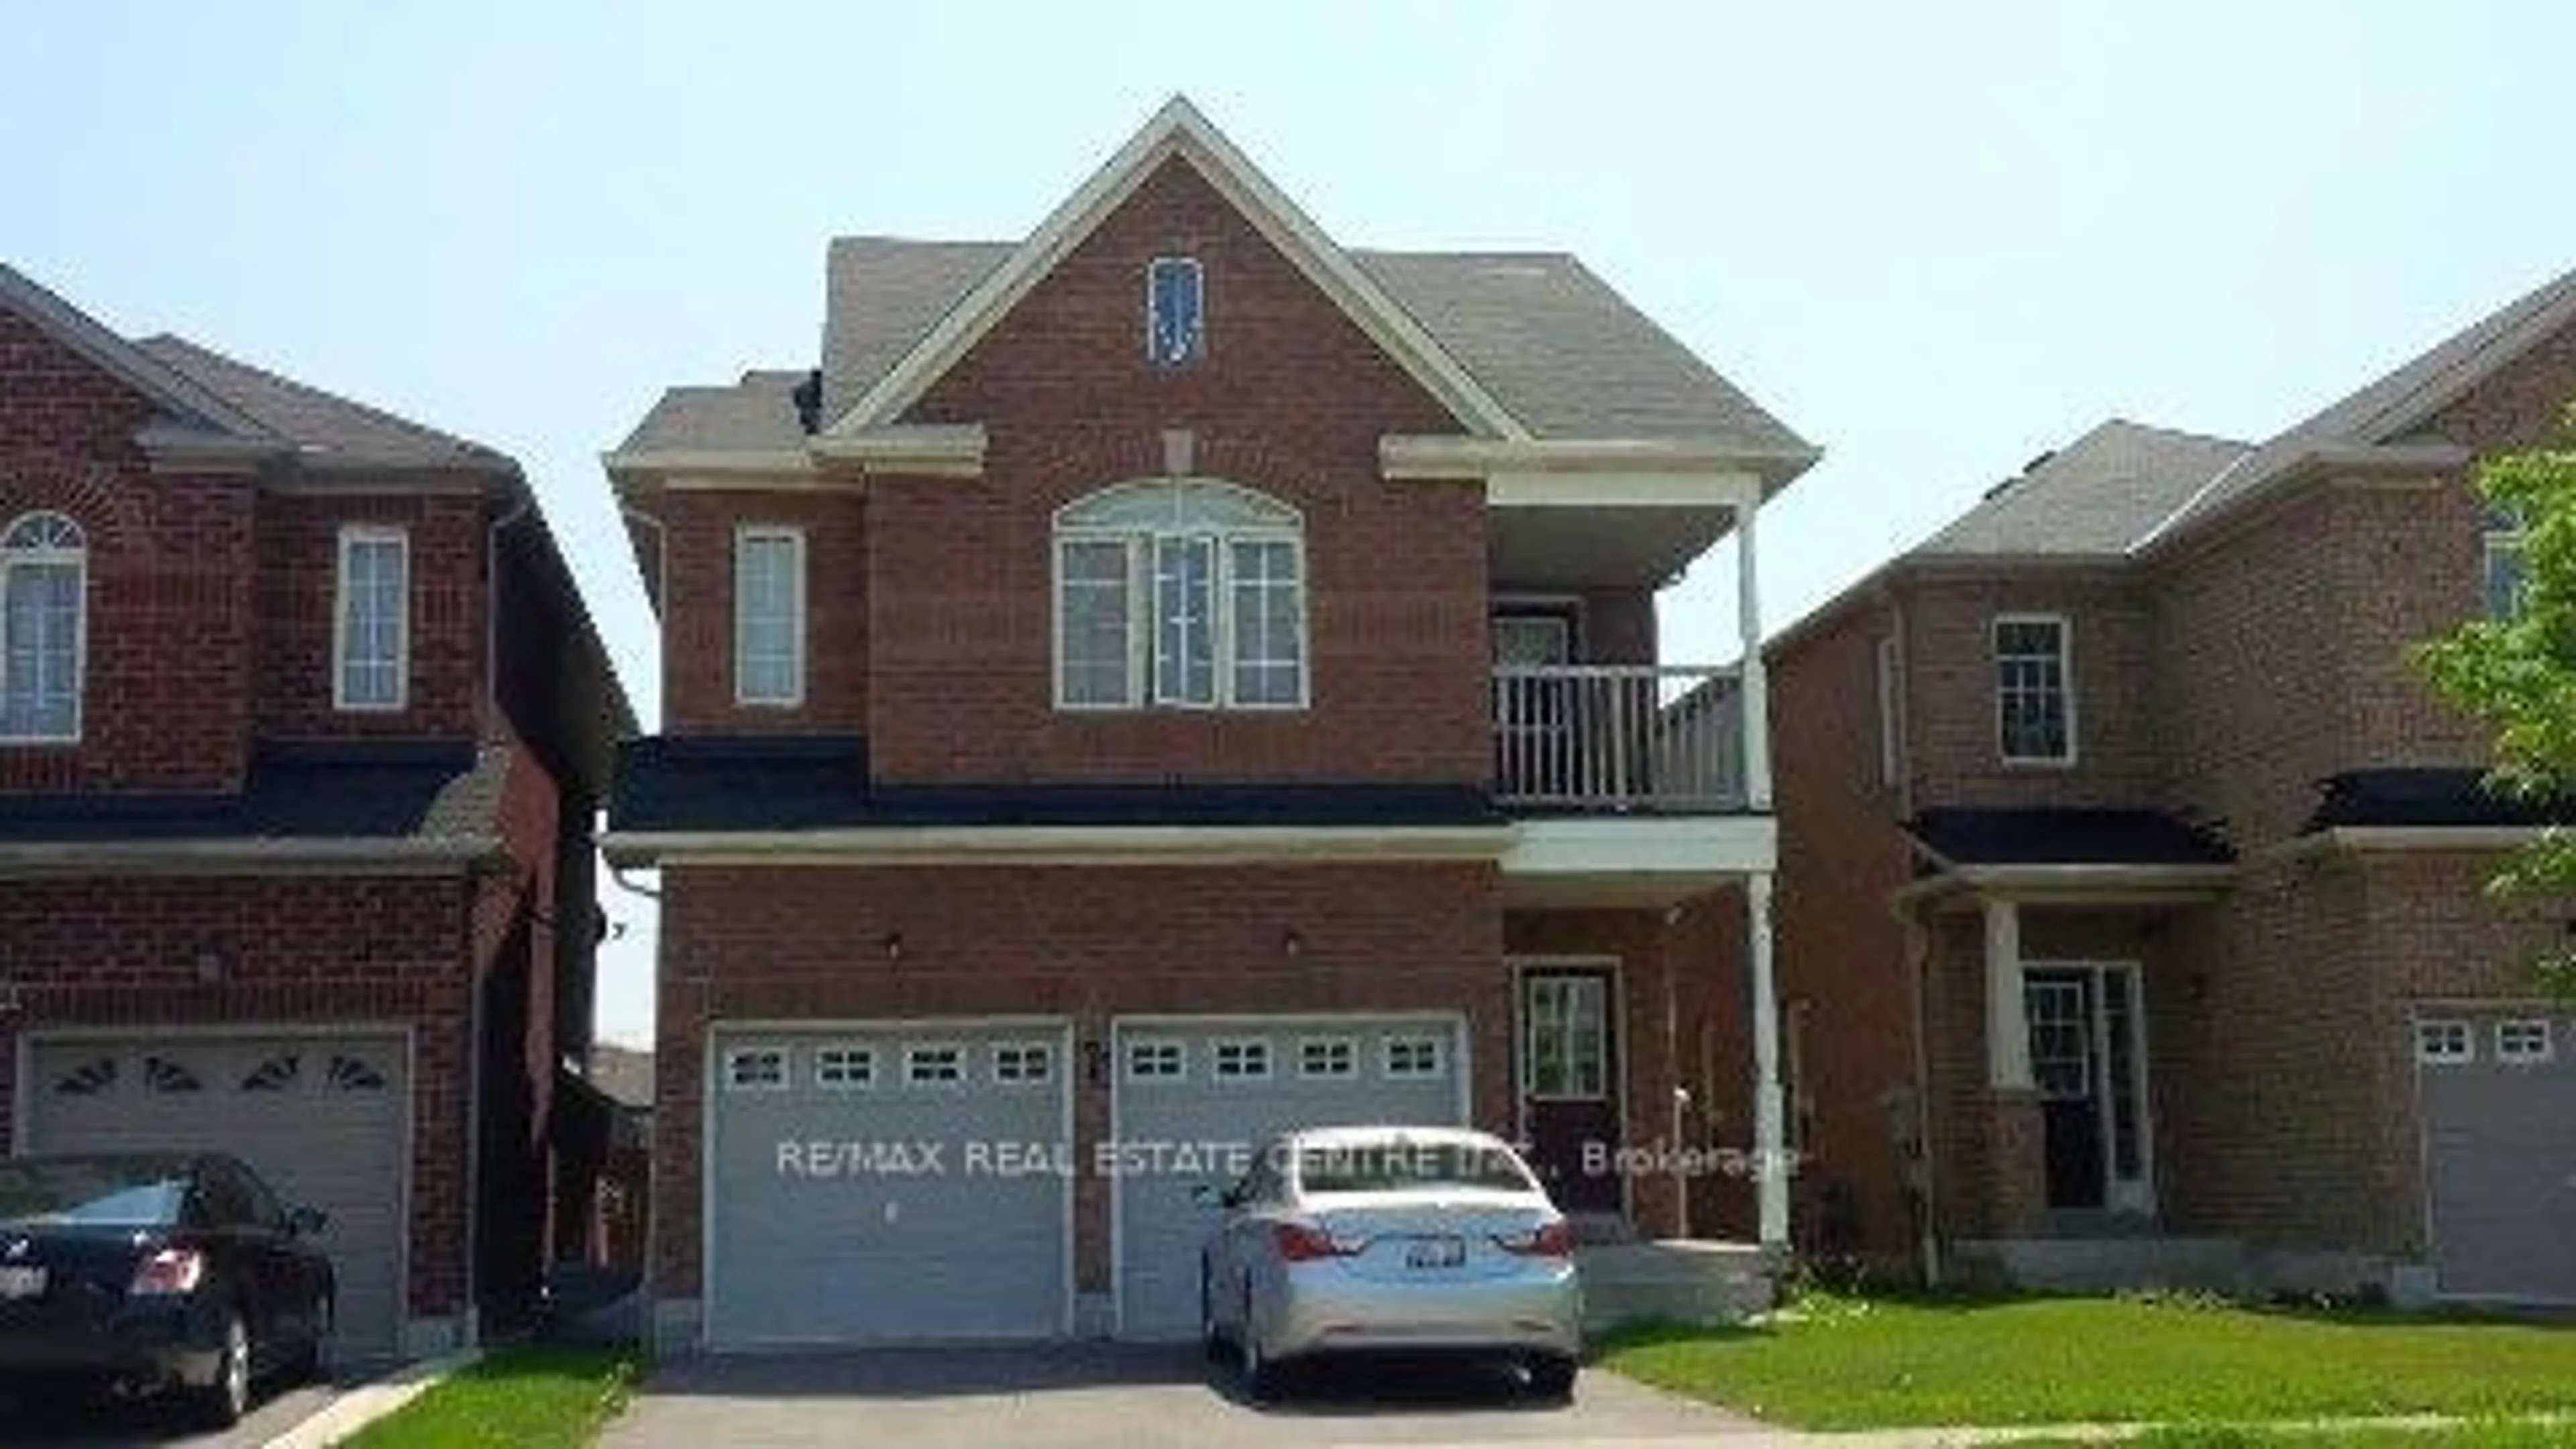 Home with brick exterior material for 506 Huntington Ridge Dr, Mississauga Ontario L5R 2X7